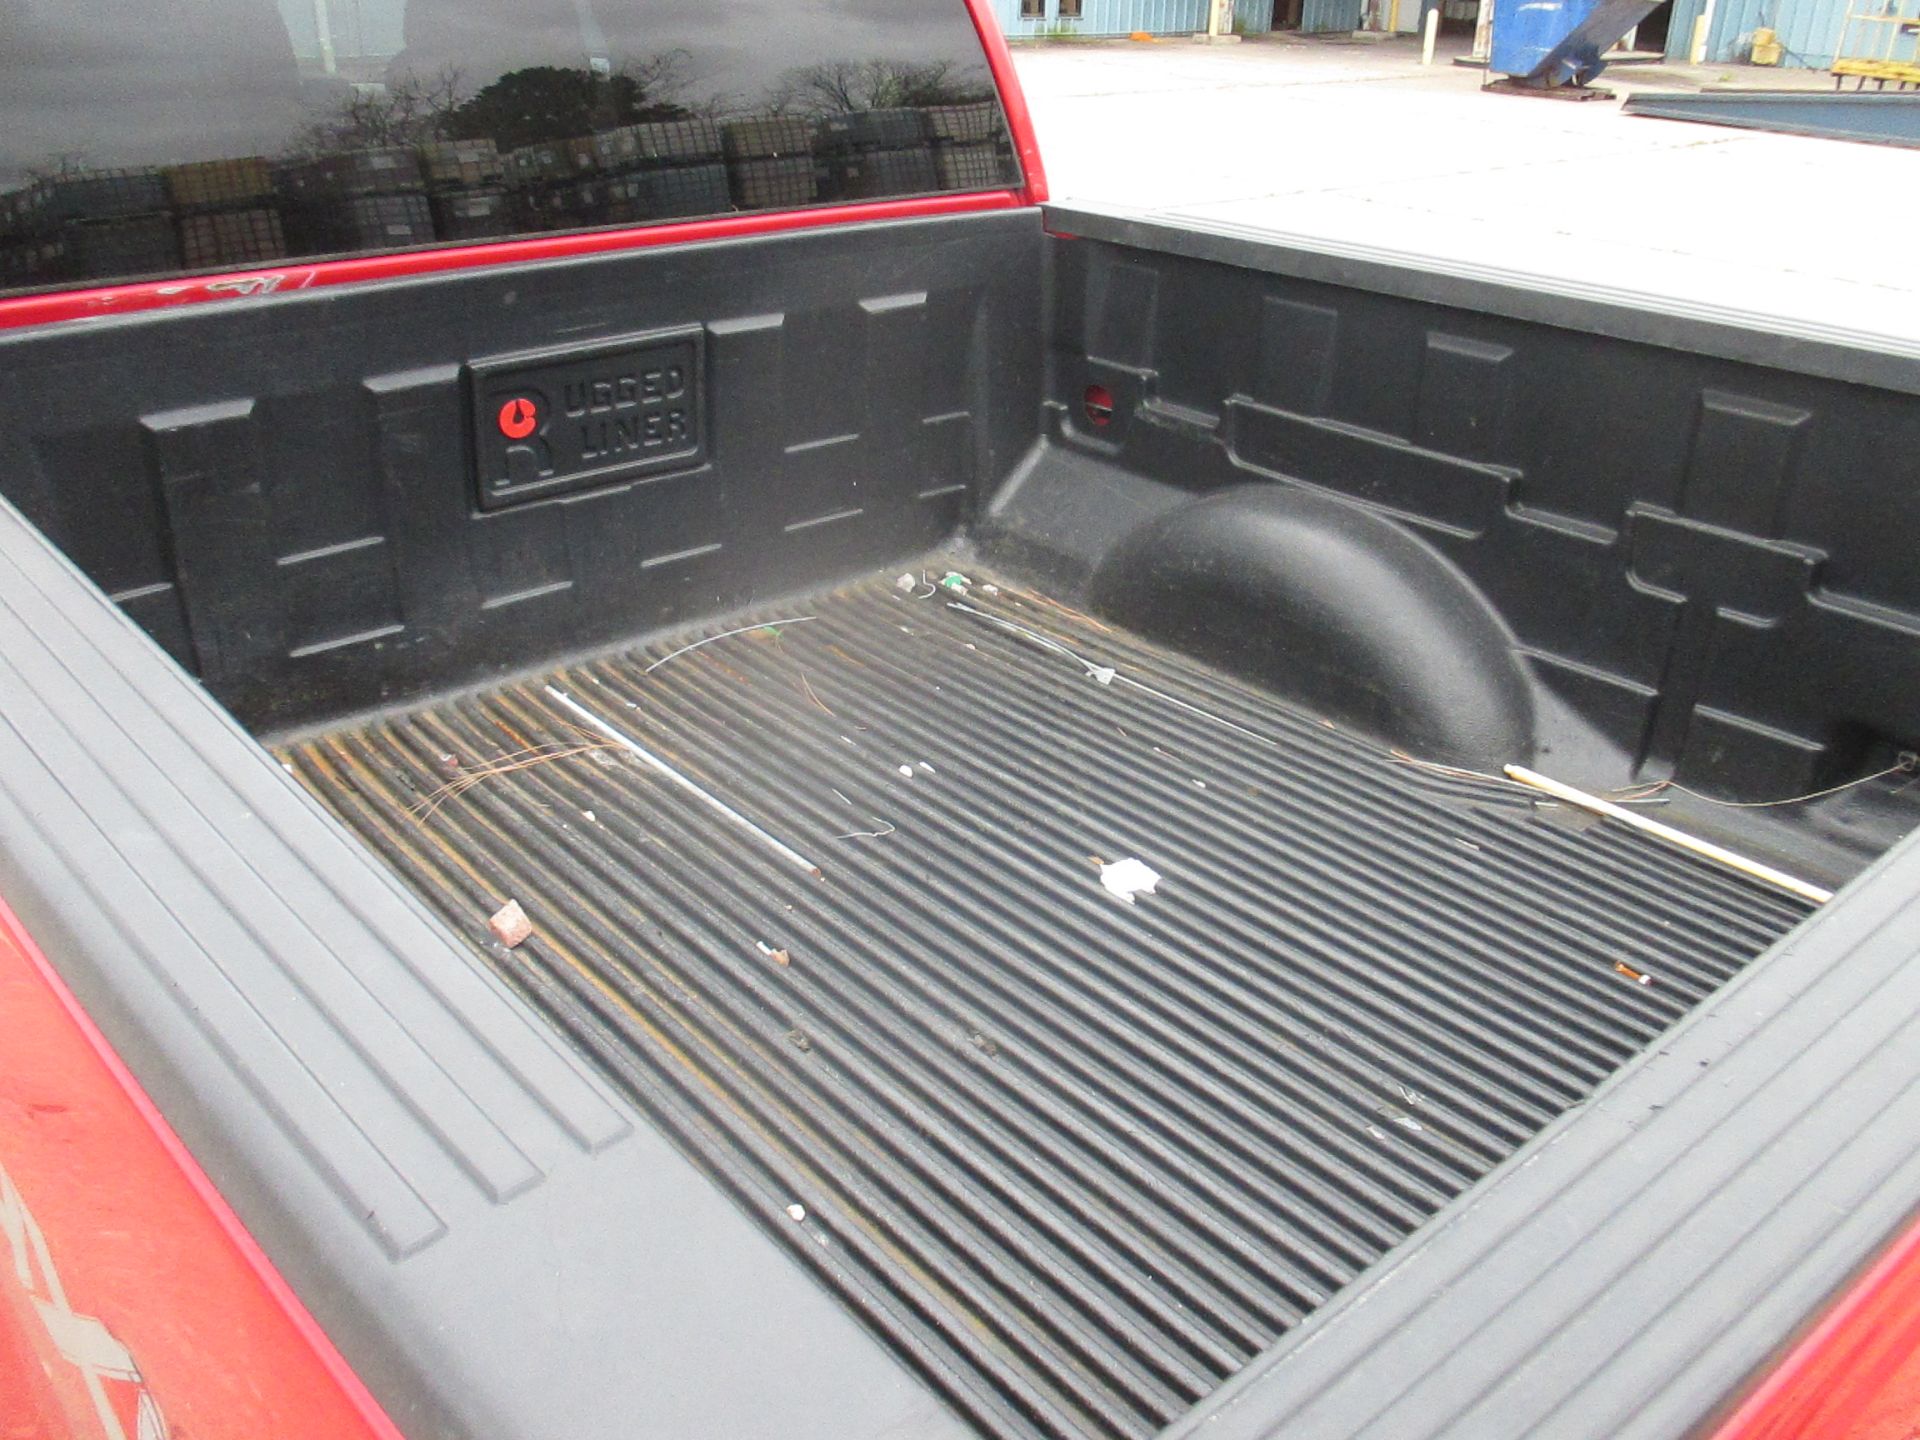 PICKUP TRUCK, 2011 FORD MDL. F150 XLT CREW CAB, gasoline engine, auto. trans., air cond., - Image 3 of 4